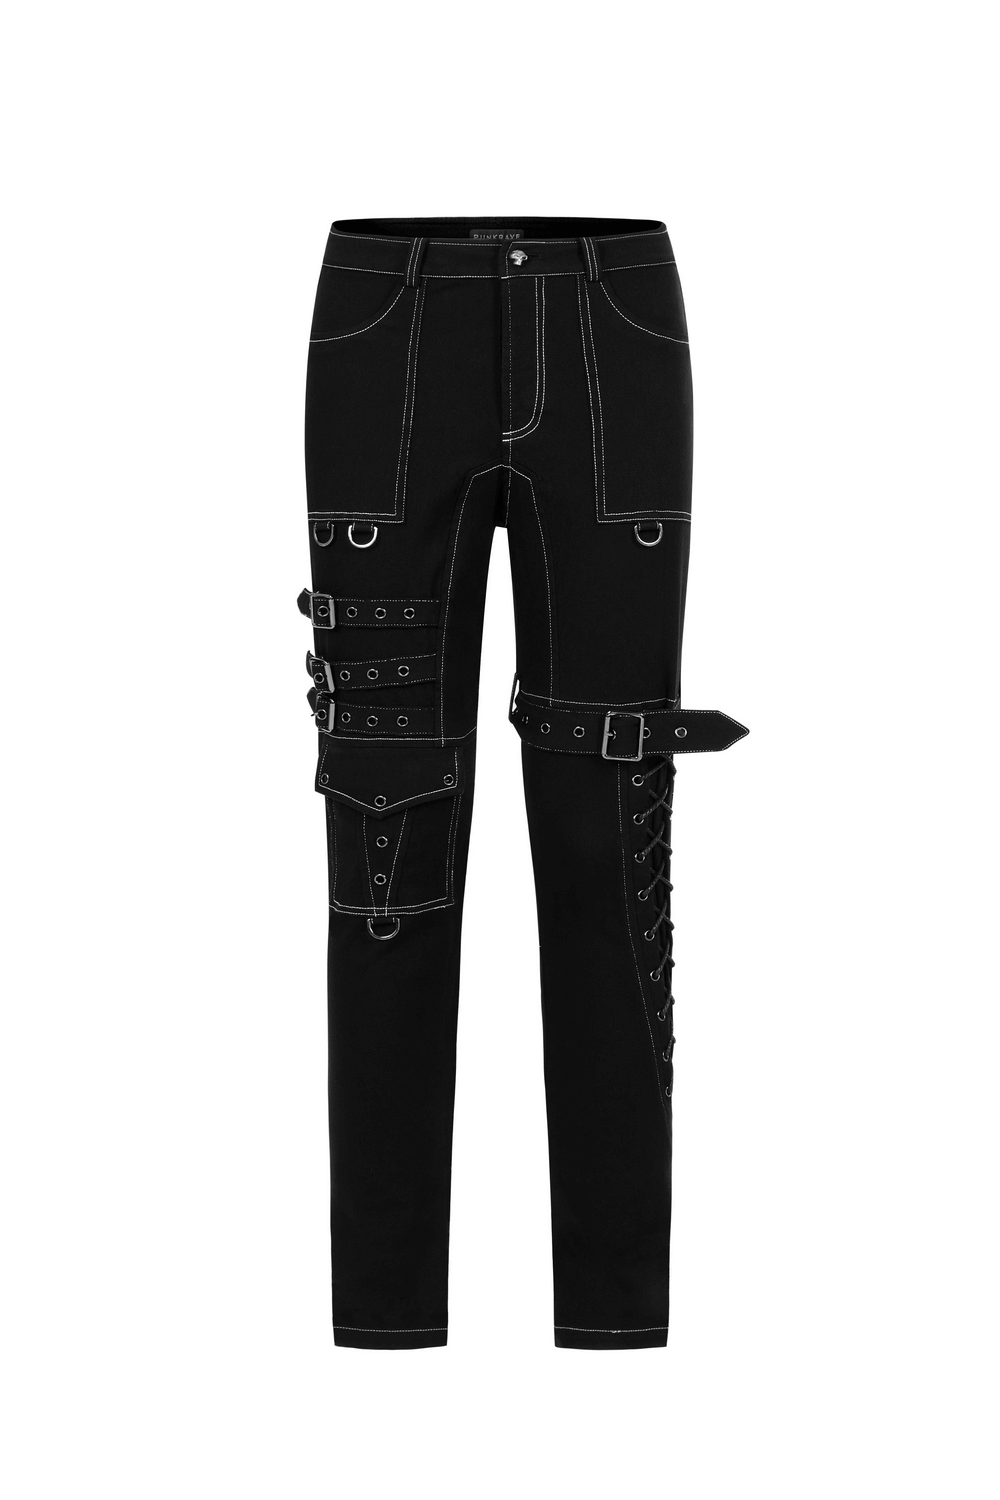 Men's Gothic Buckled Cargo Pants with Strap Accents